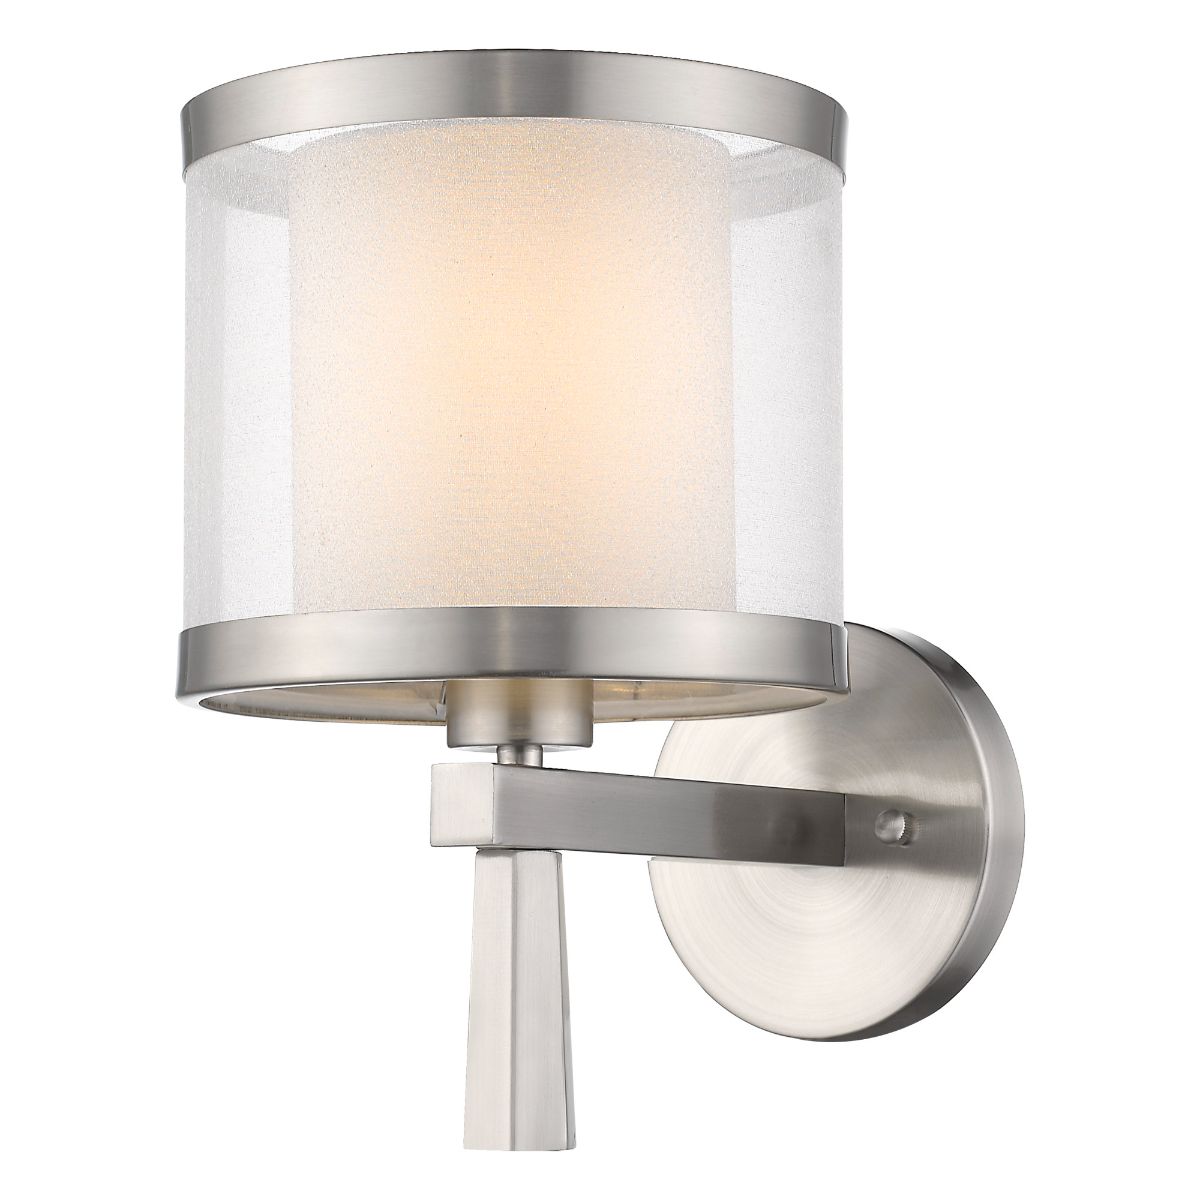 Lux 13 in. Armed Sconce Nickel Finish